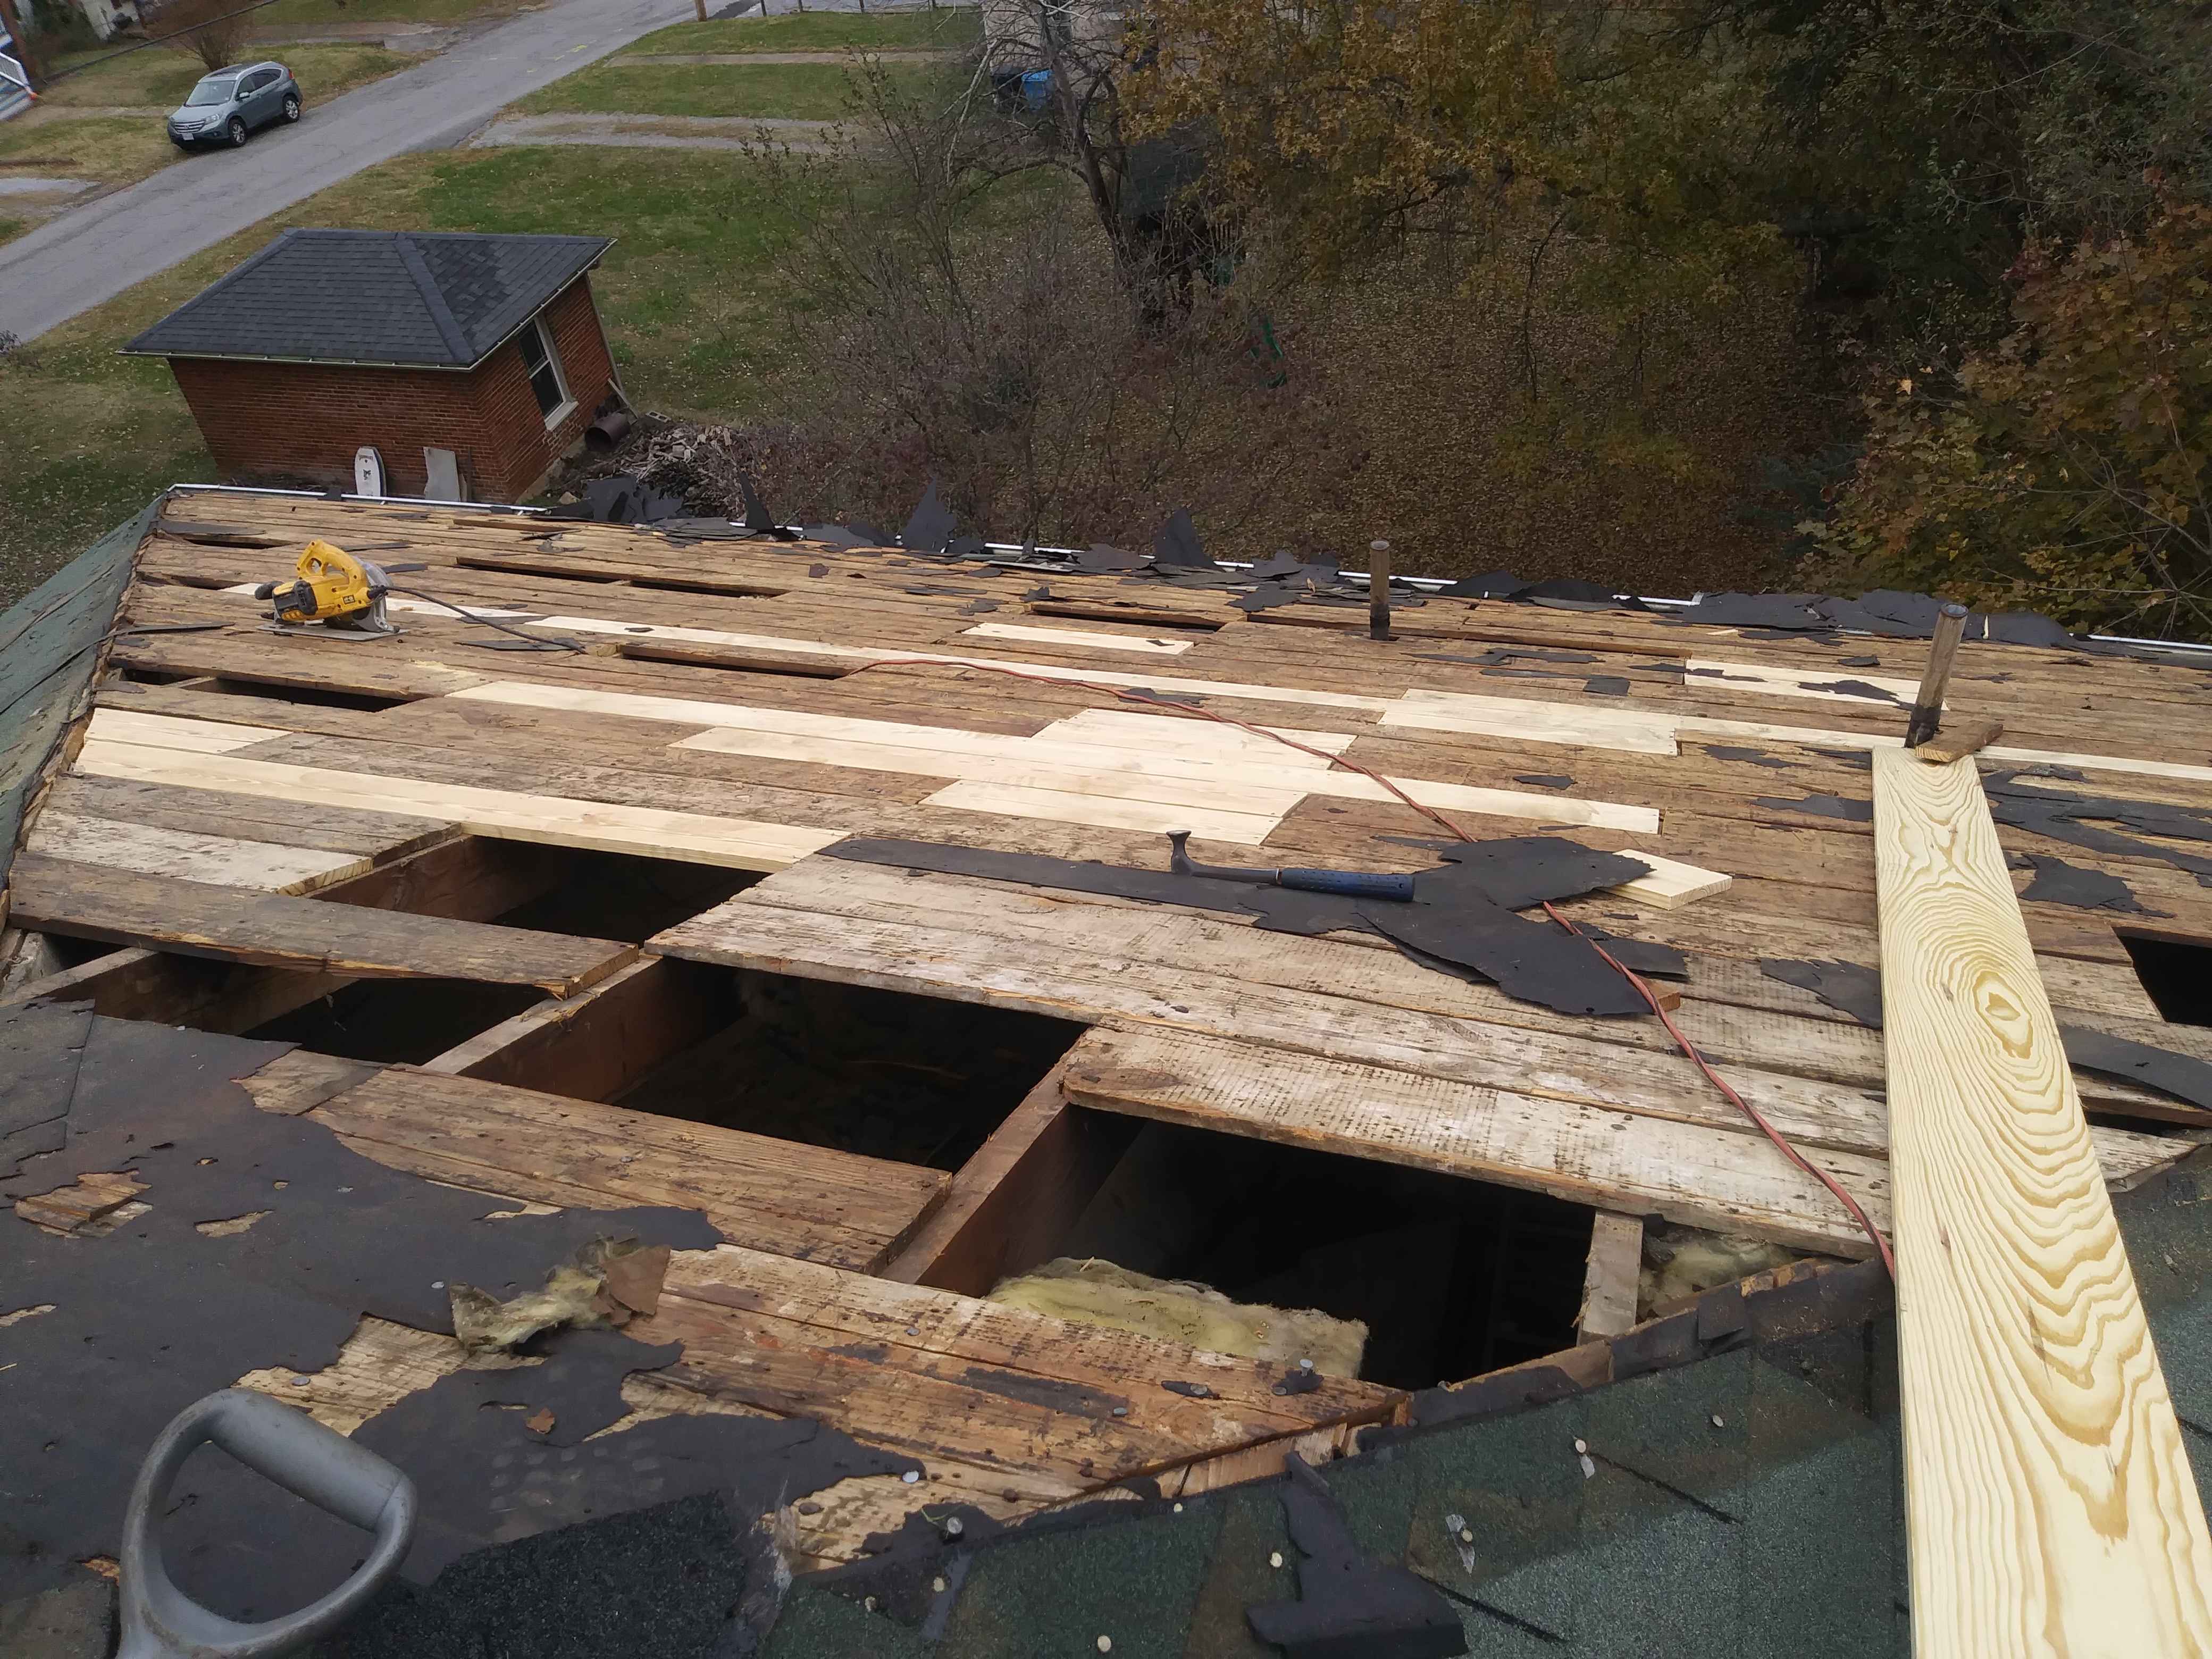 Wood being replaced on an opened roof